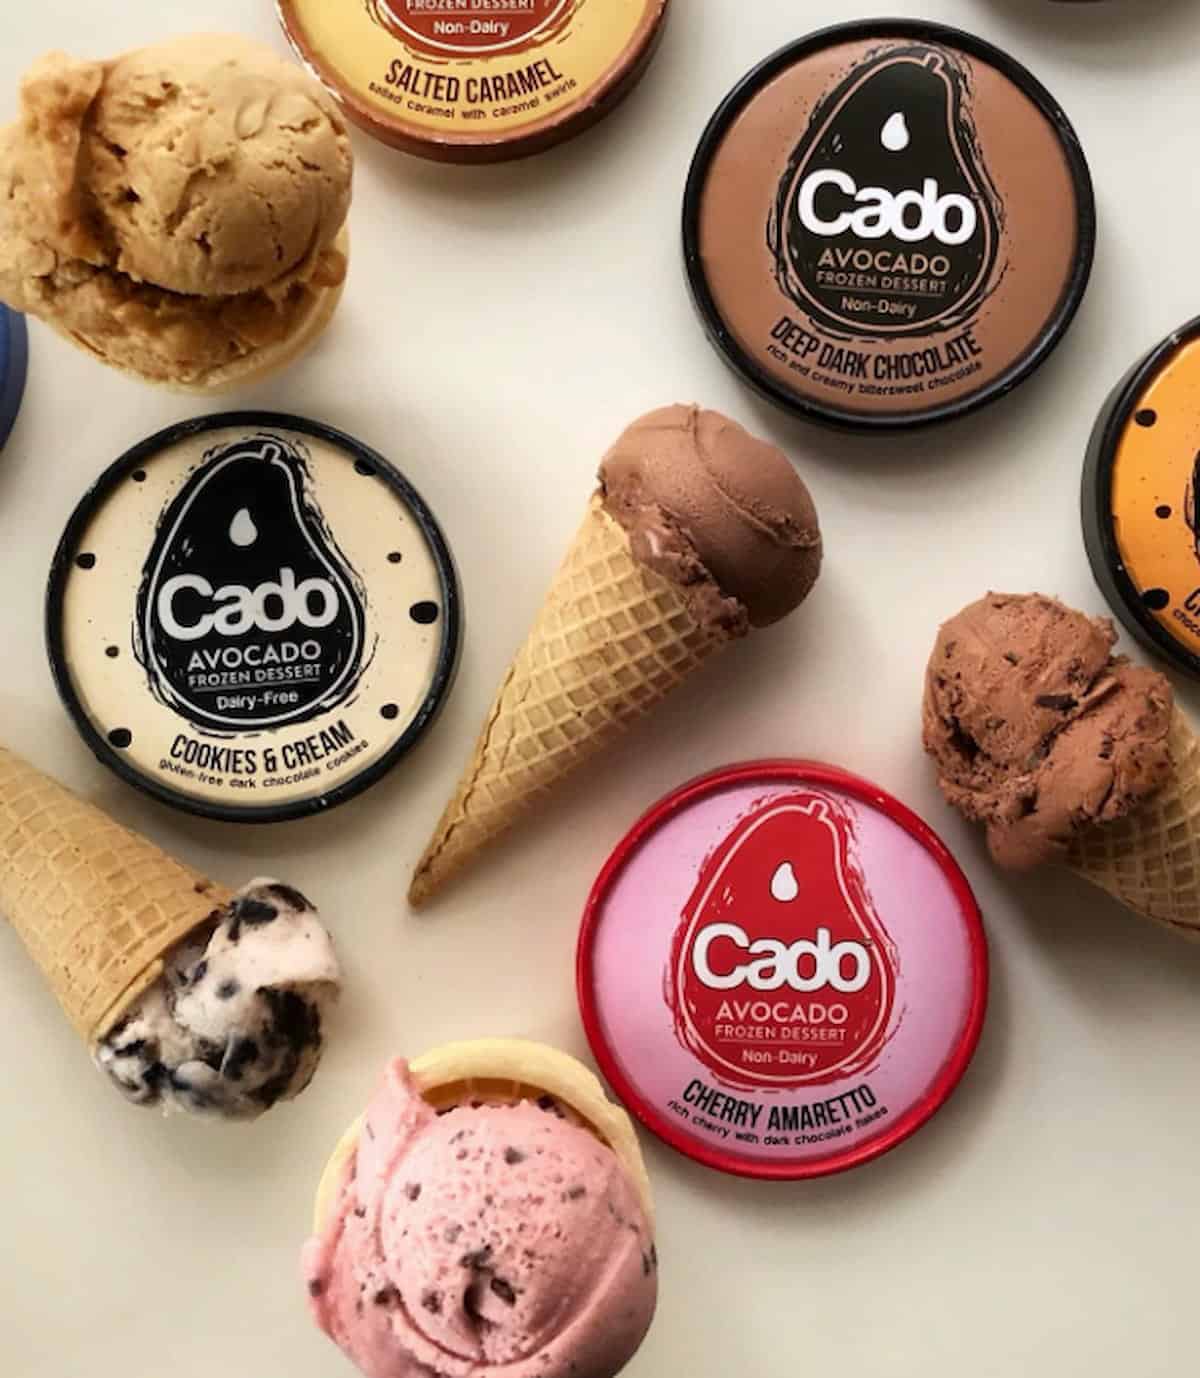 Containers of Cado frozen dessert next to waffle cones.